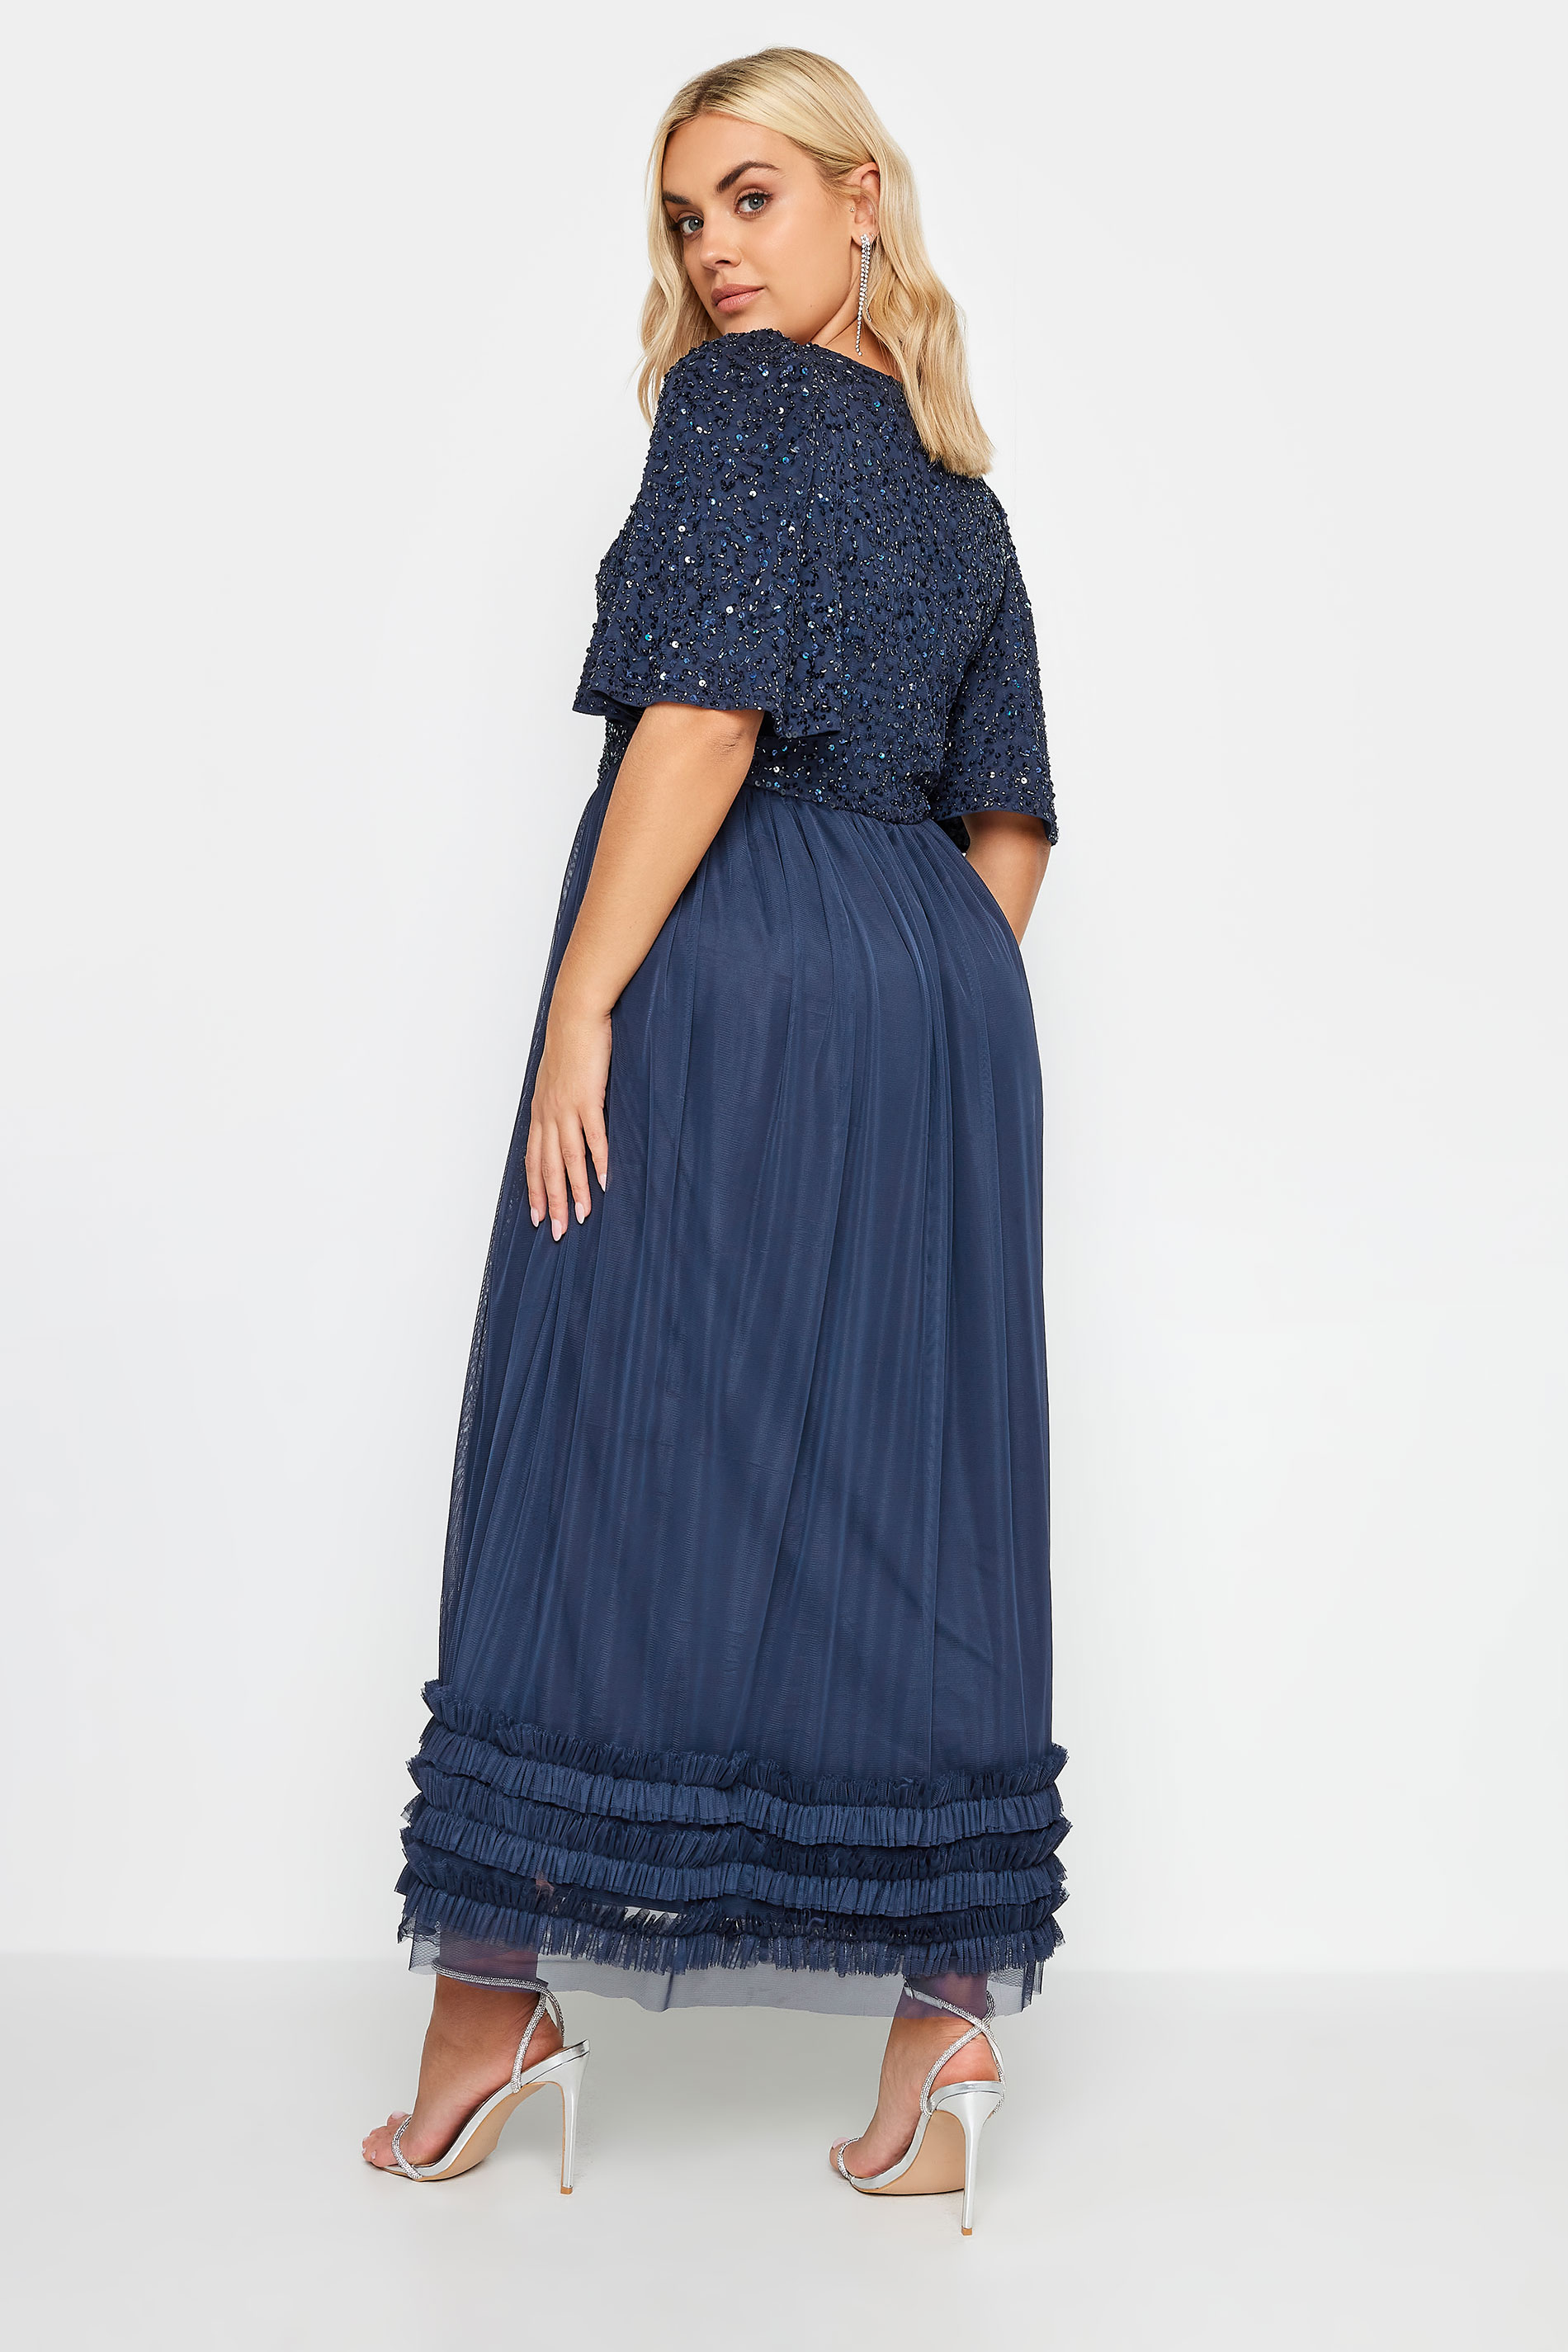 LUXE Plus Size Curve Navy Blue Sequin Sweetheart Ruffle Maxi Dress | Yours Clothing  3